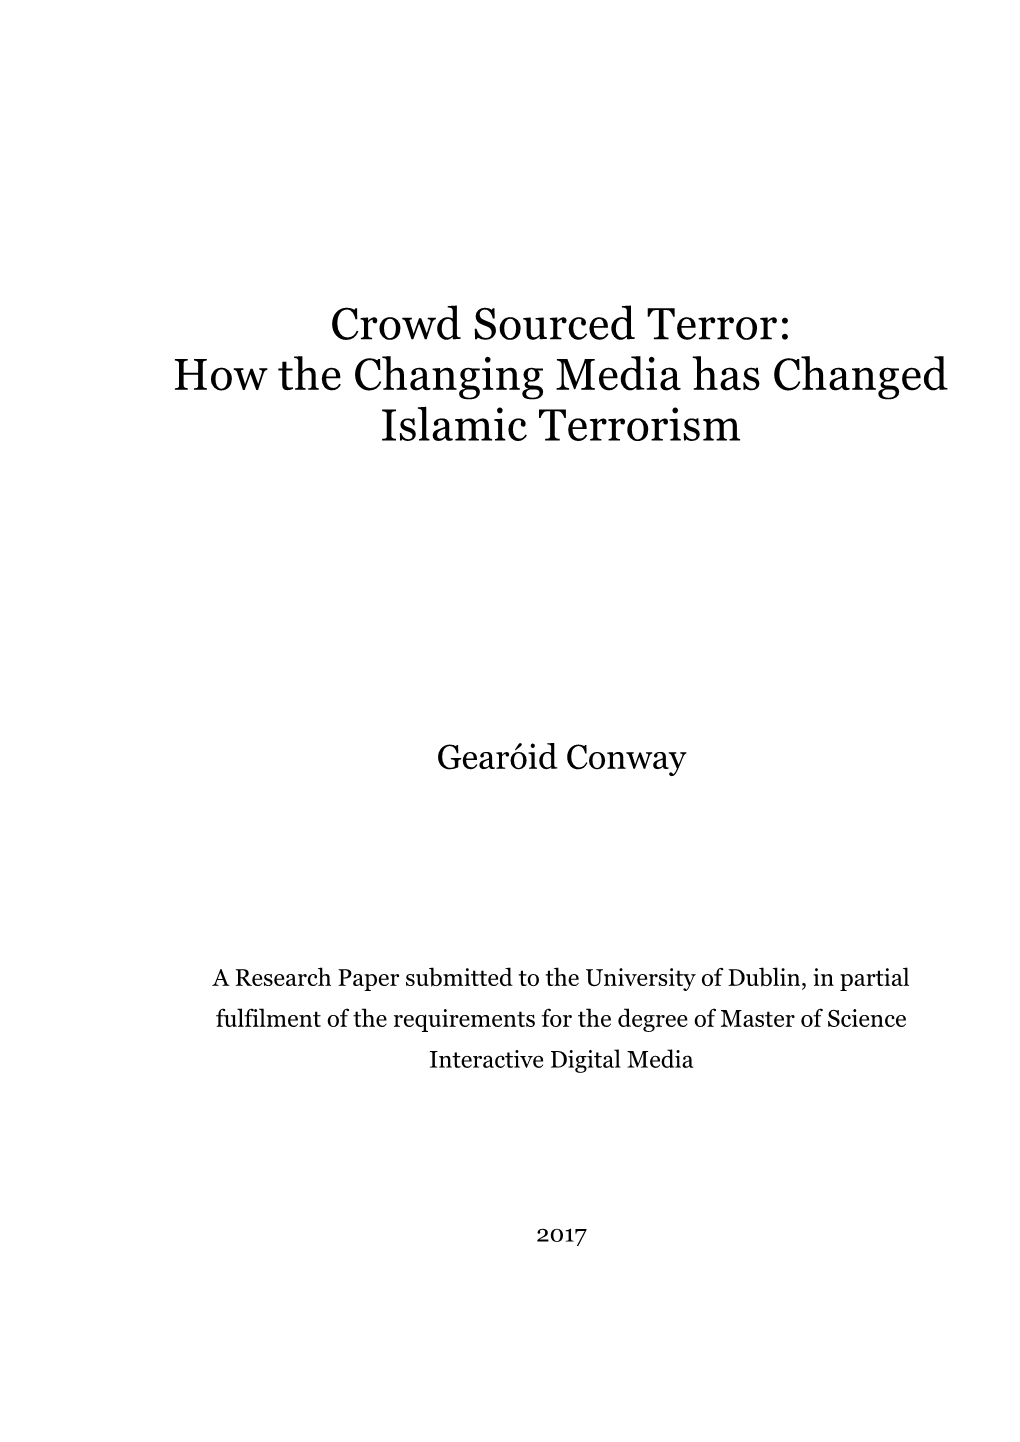 How the Changing Media Has Changed Islamic Terrorism